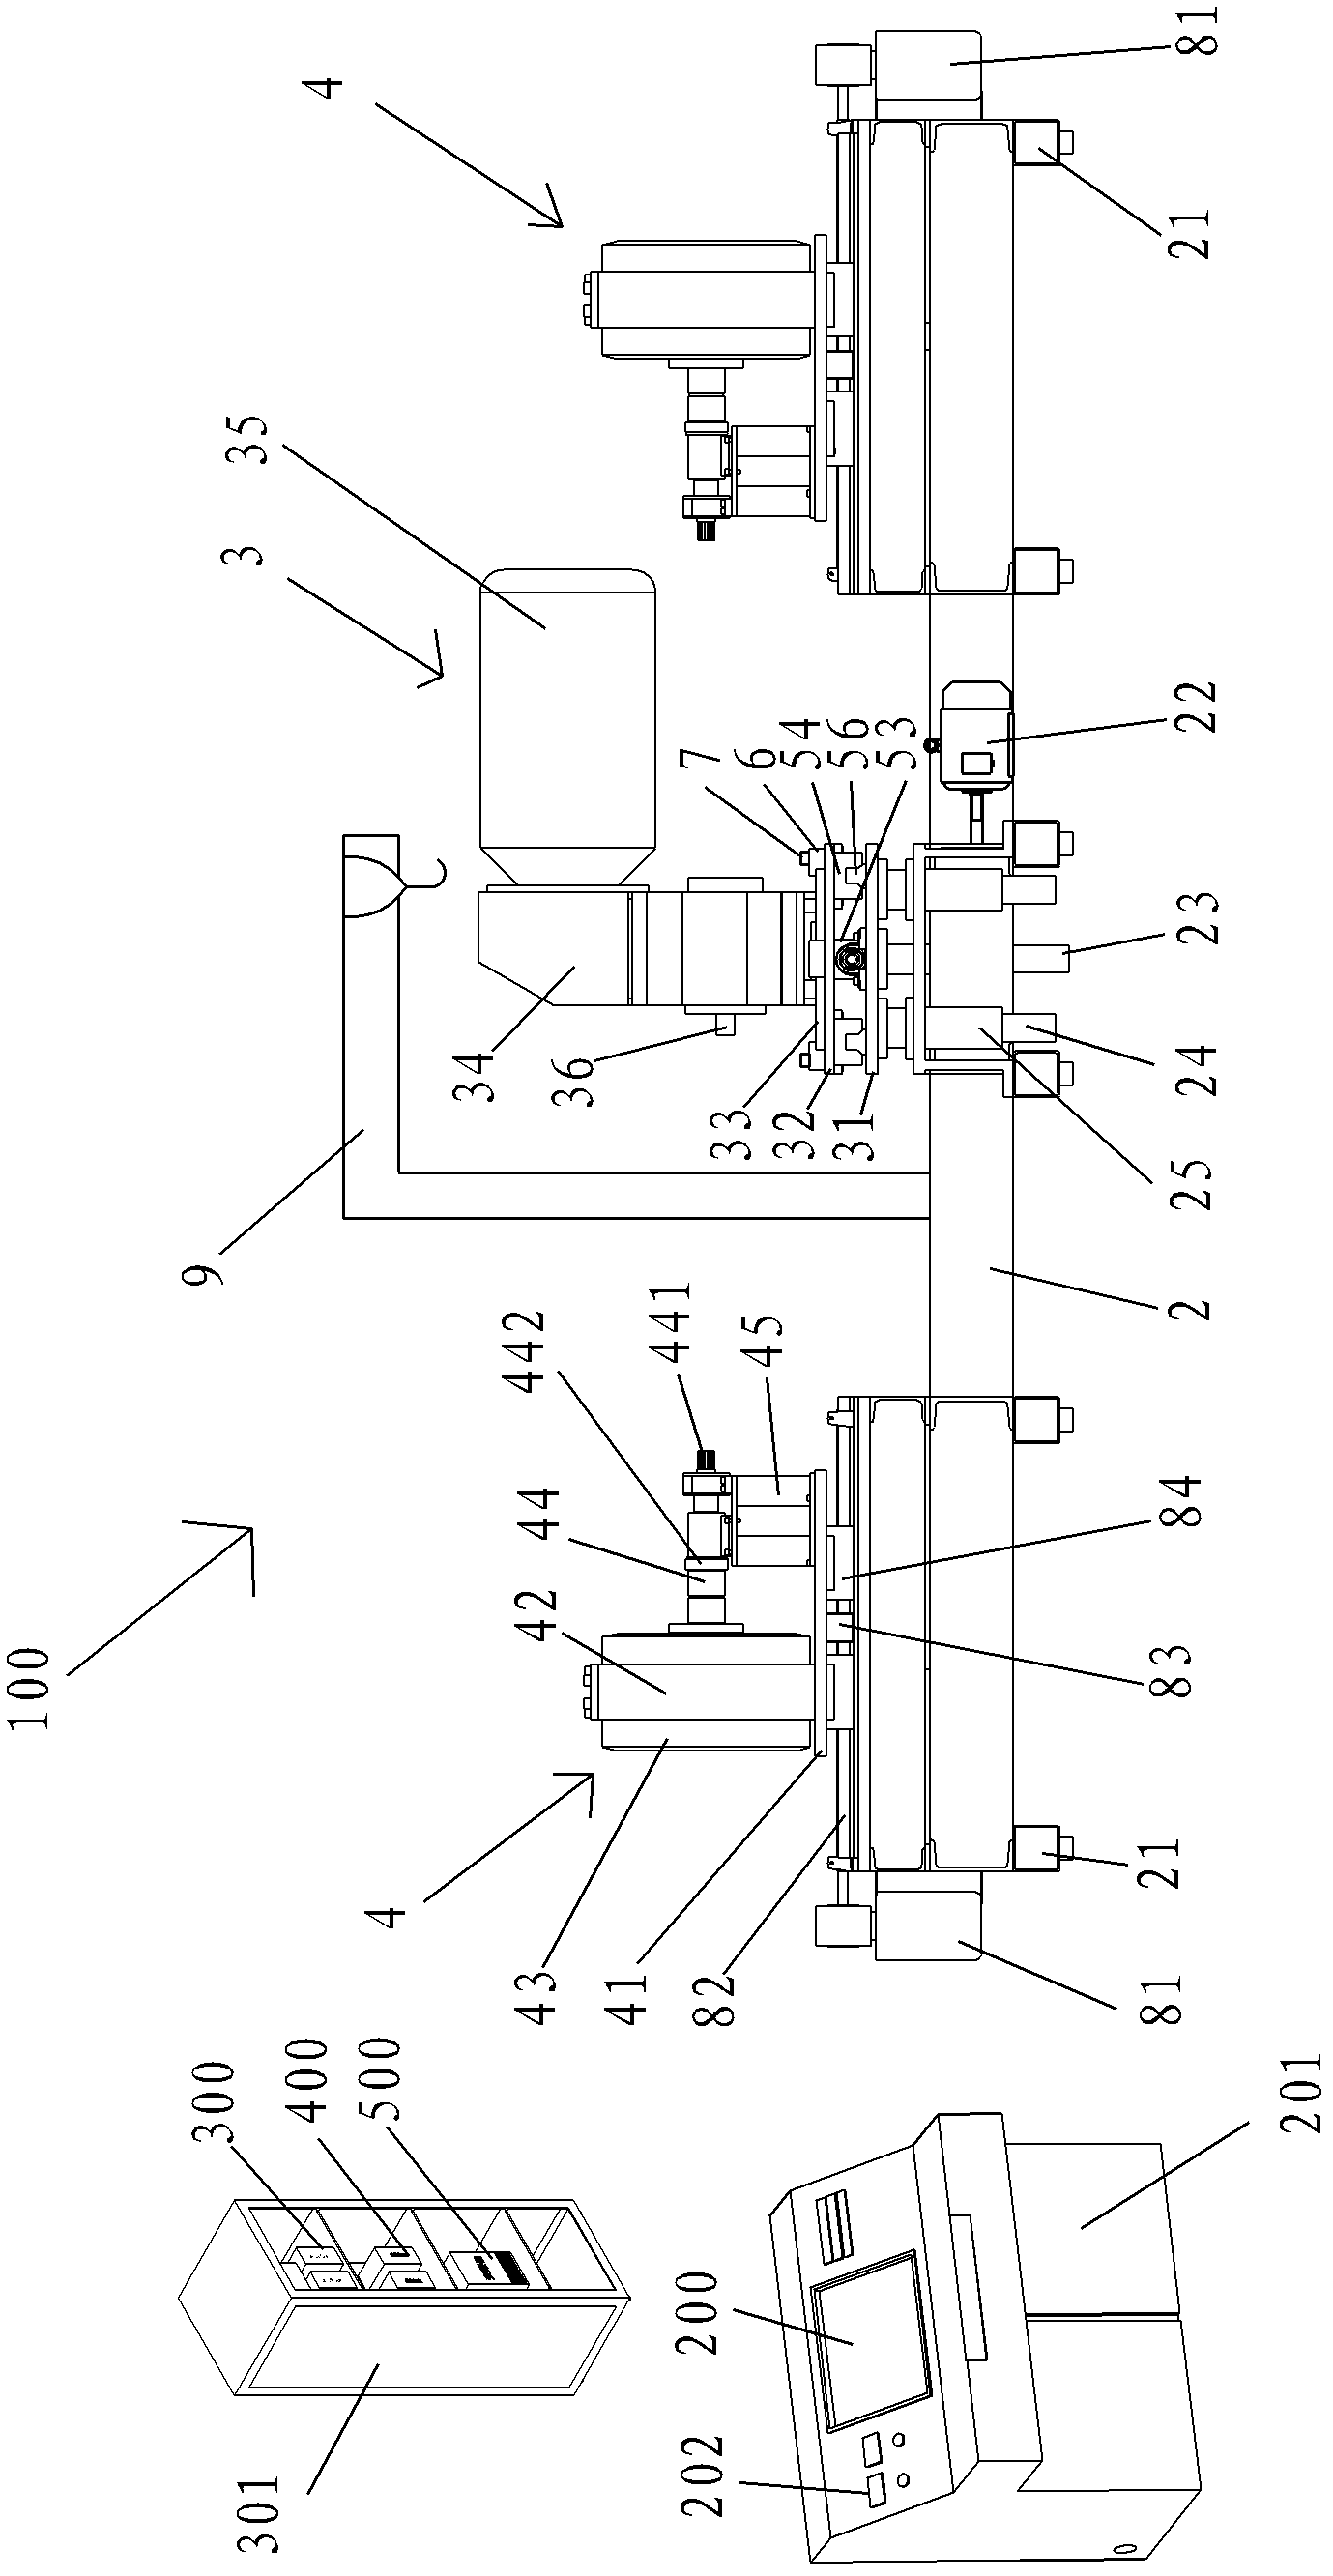 Atomatic transmission performance and fault detection apparatus and method thereof